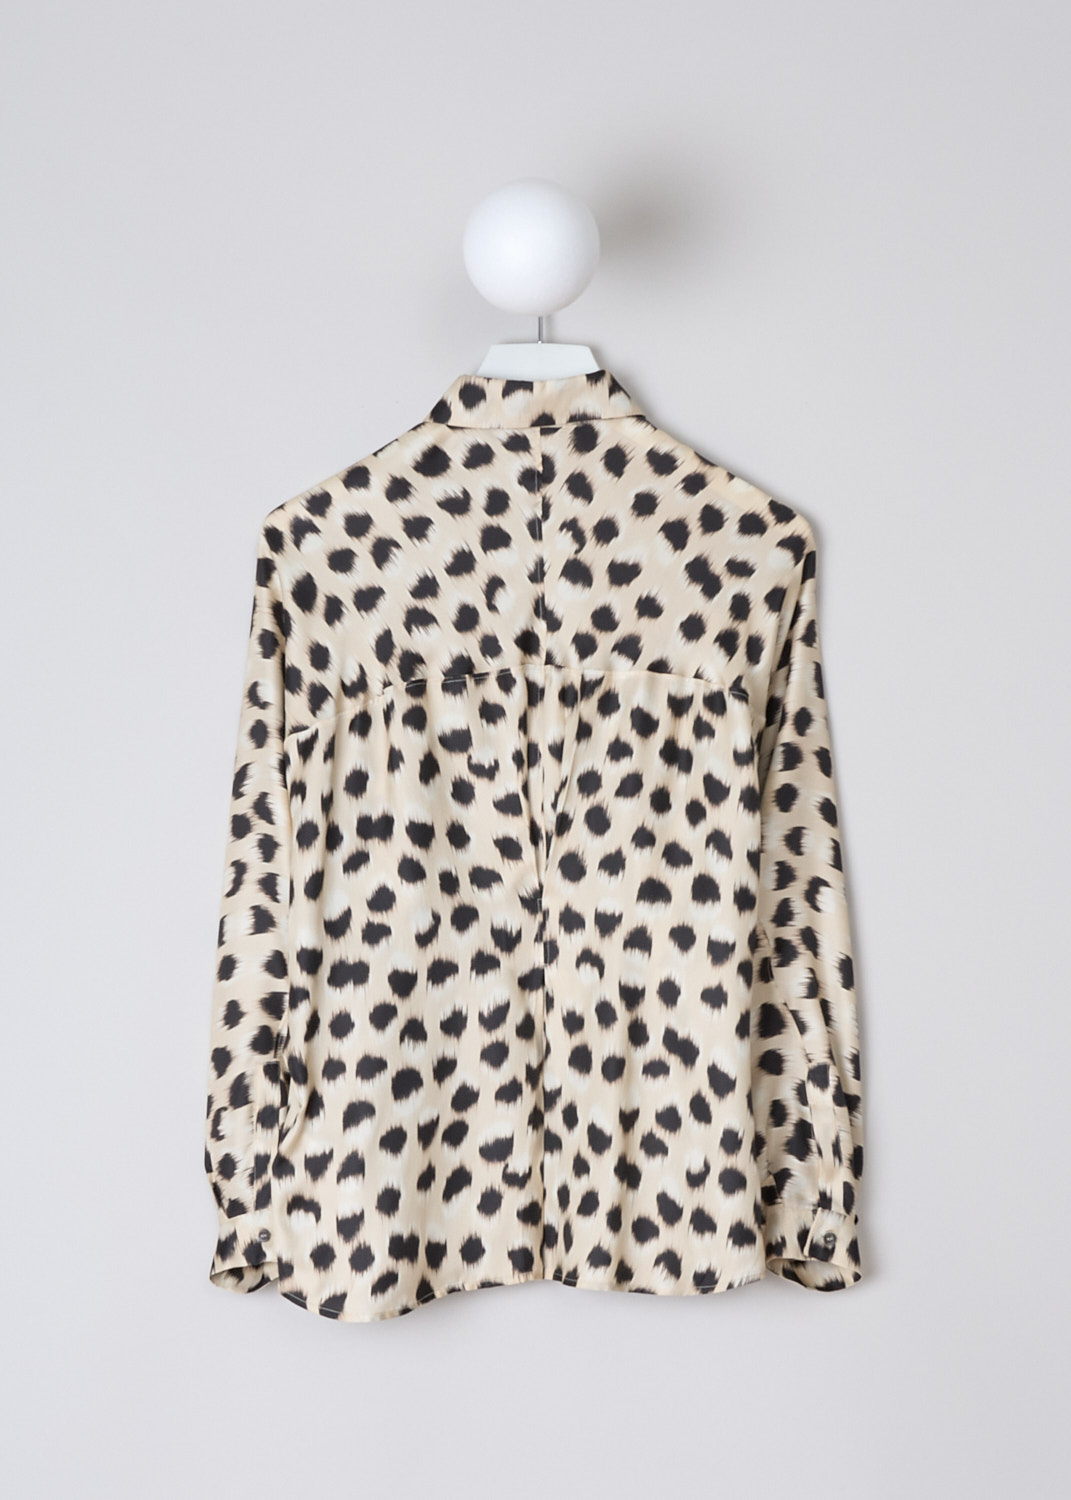 ASPESI, FADED ANIMAL PRINT BLOUSE, 5456_V592_60113, Beige, Print, Black, Back, This beige blouse with faded animal print features a classic collar, a concealed front button closure and Dolman sleeves with buttoned cuffs. The blouse has a pleated back and a slightly rounded hemline. 
